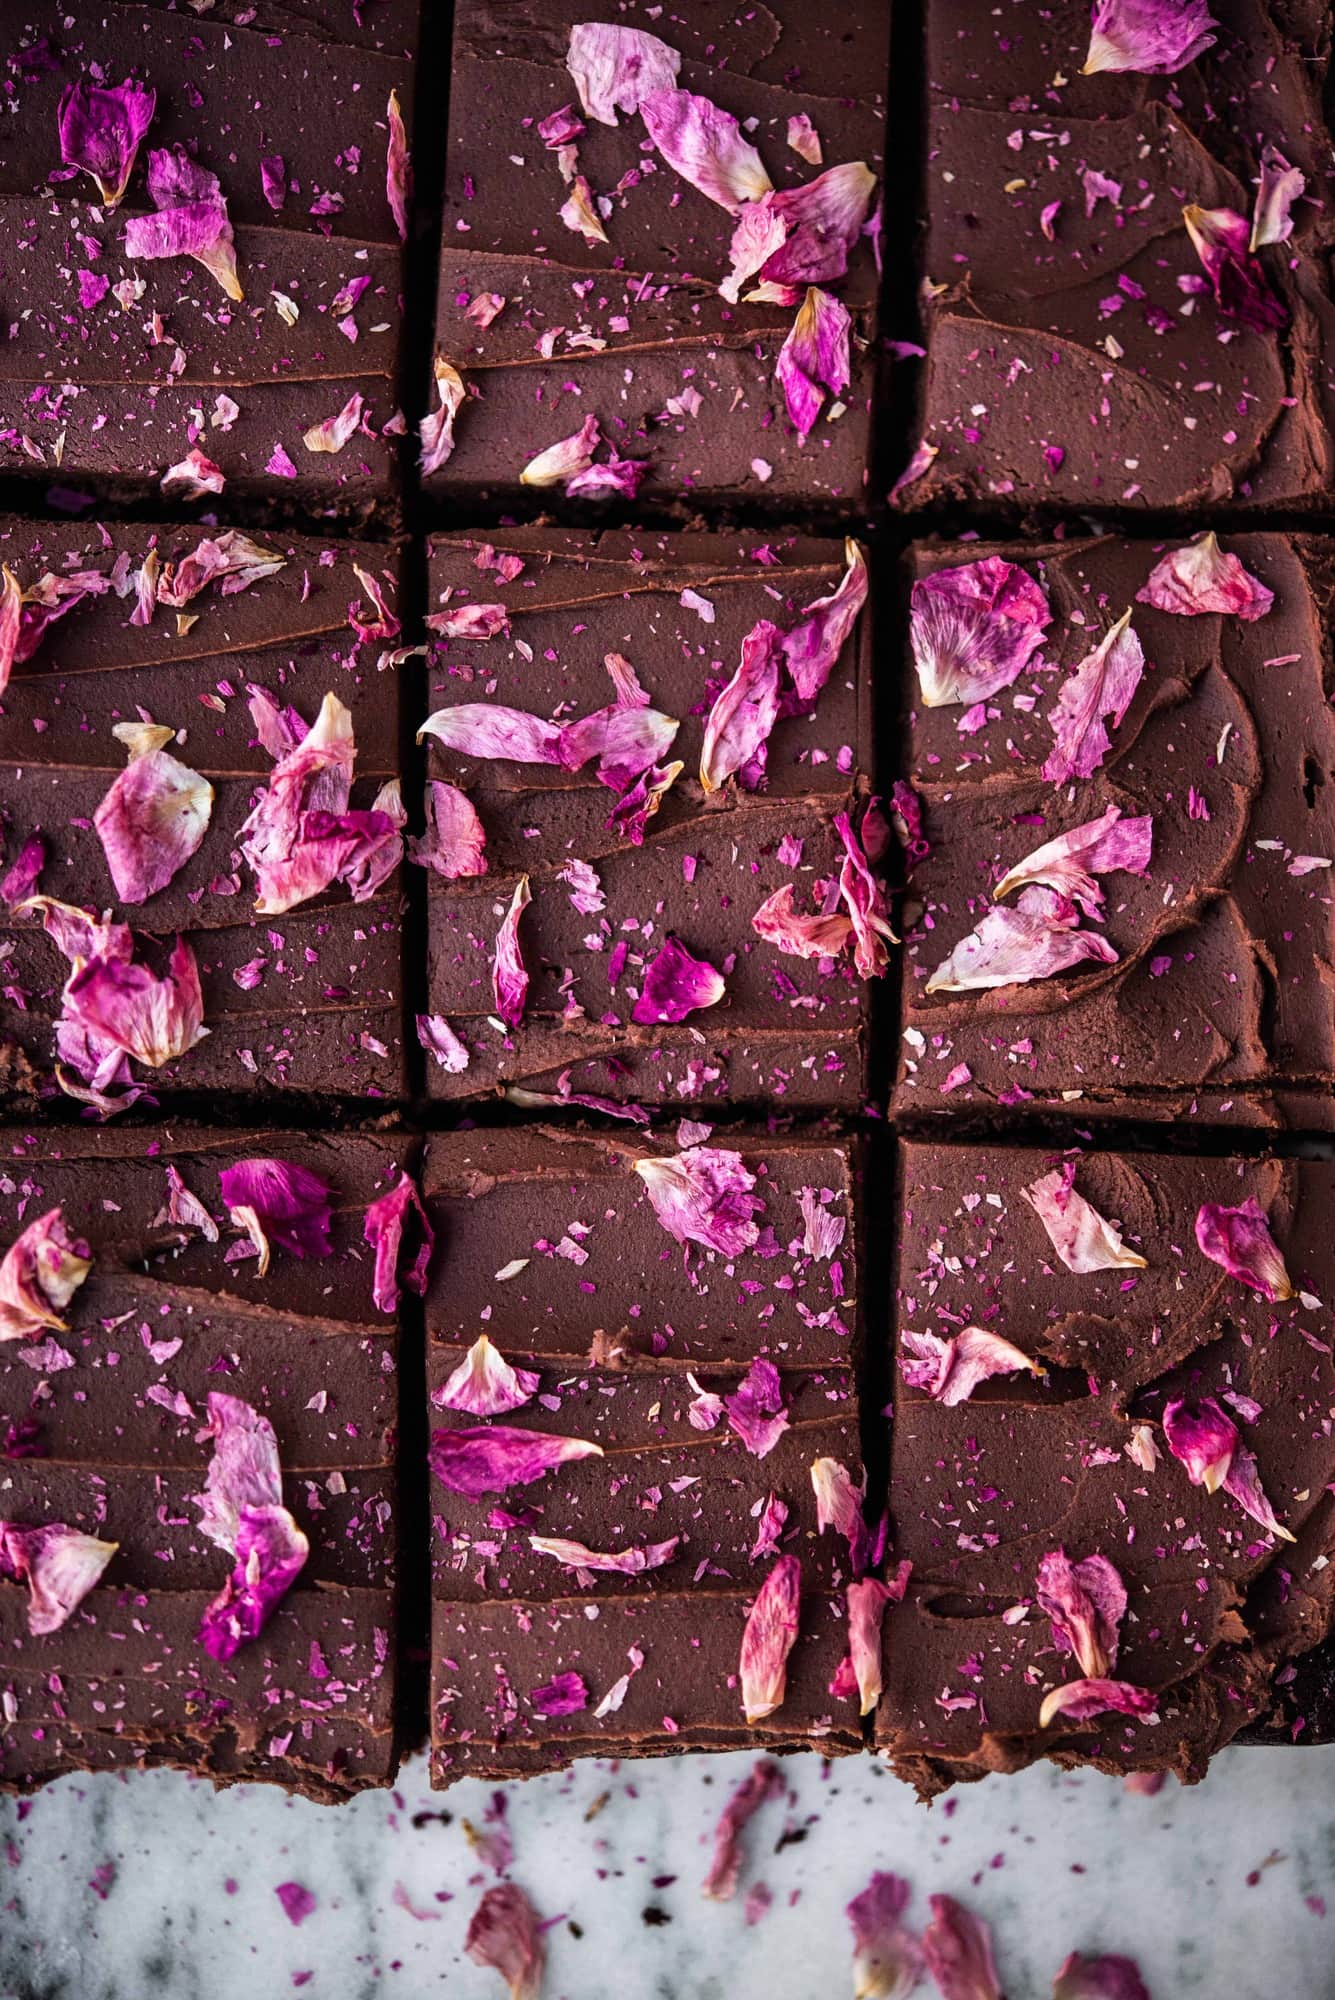 Overhead close up of chocolate ganache frosting brownies with rose petals